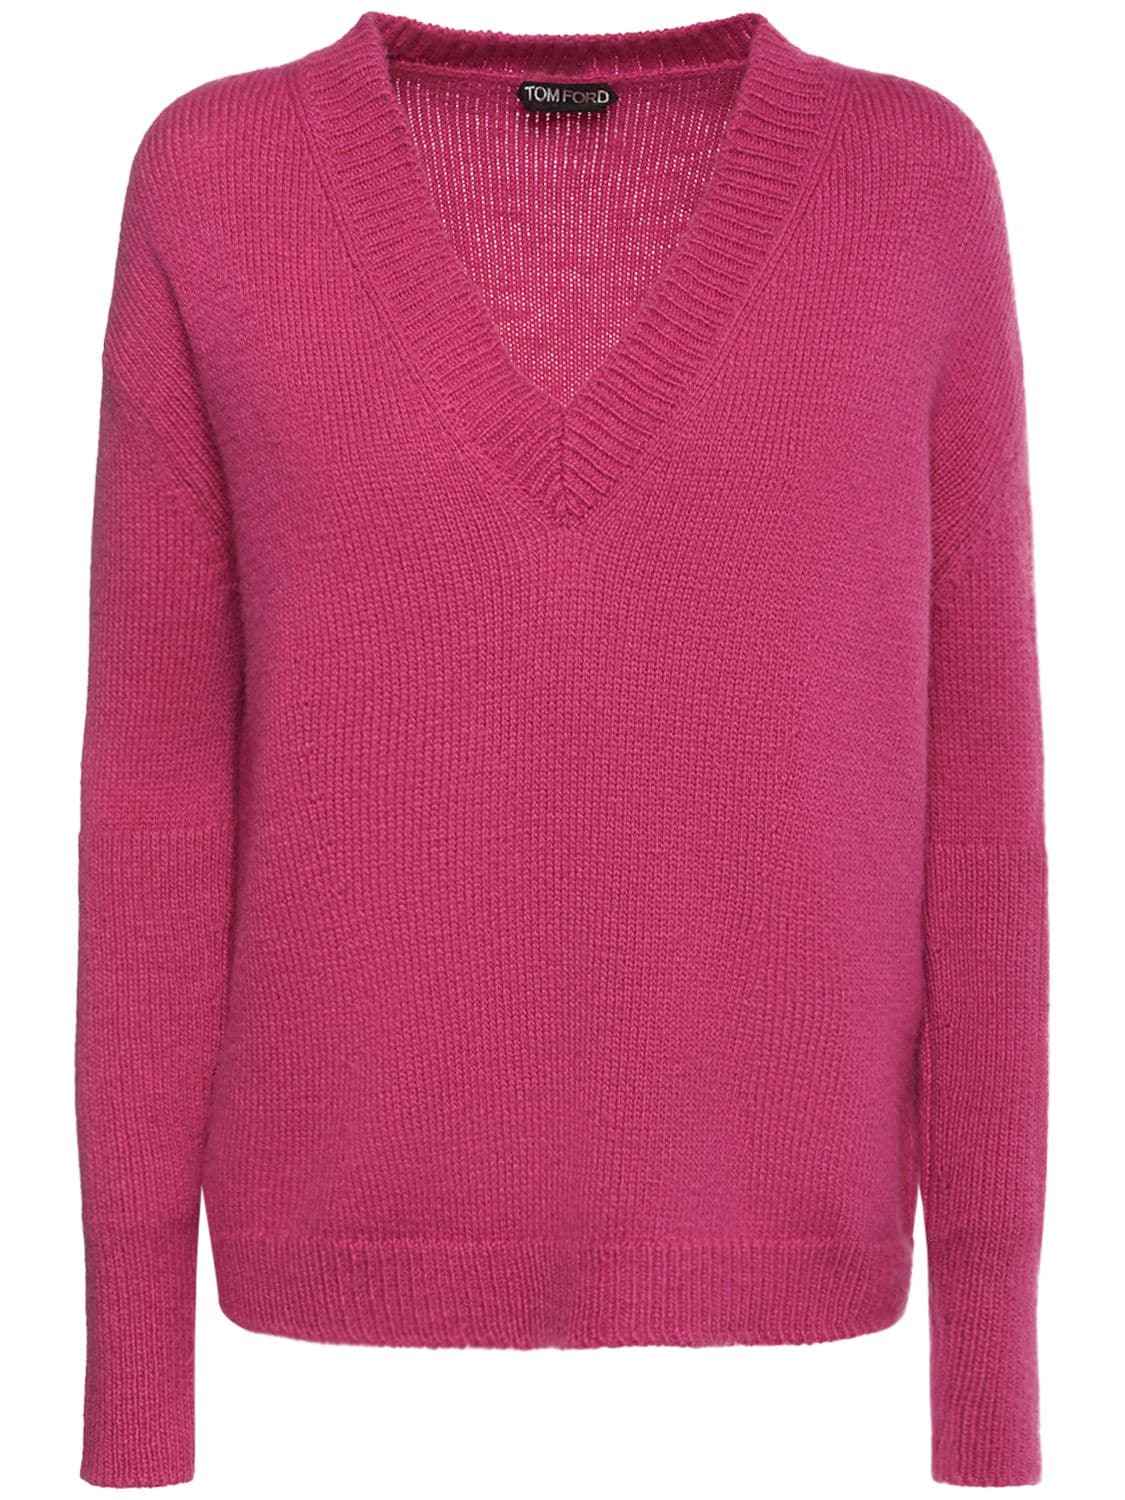 Image of Chunky Wool & Cashmere Knit Sweater